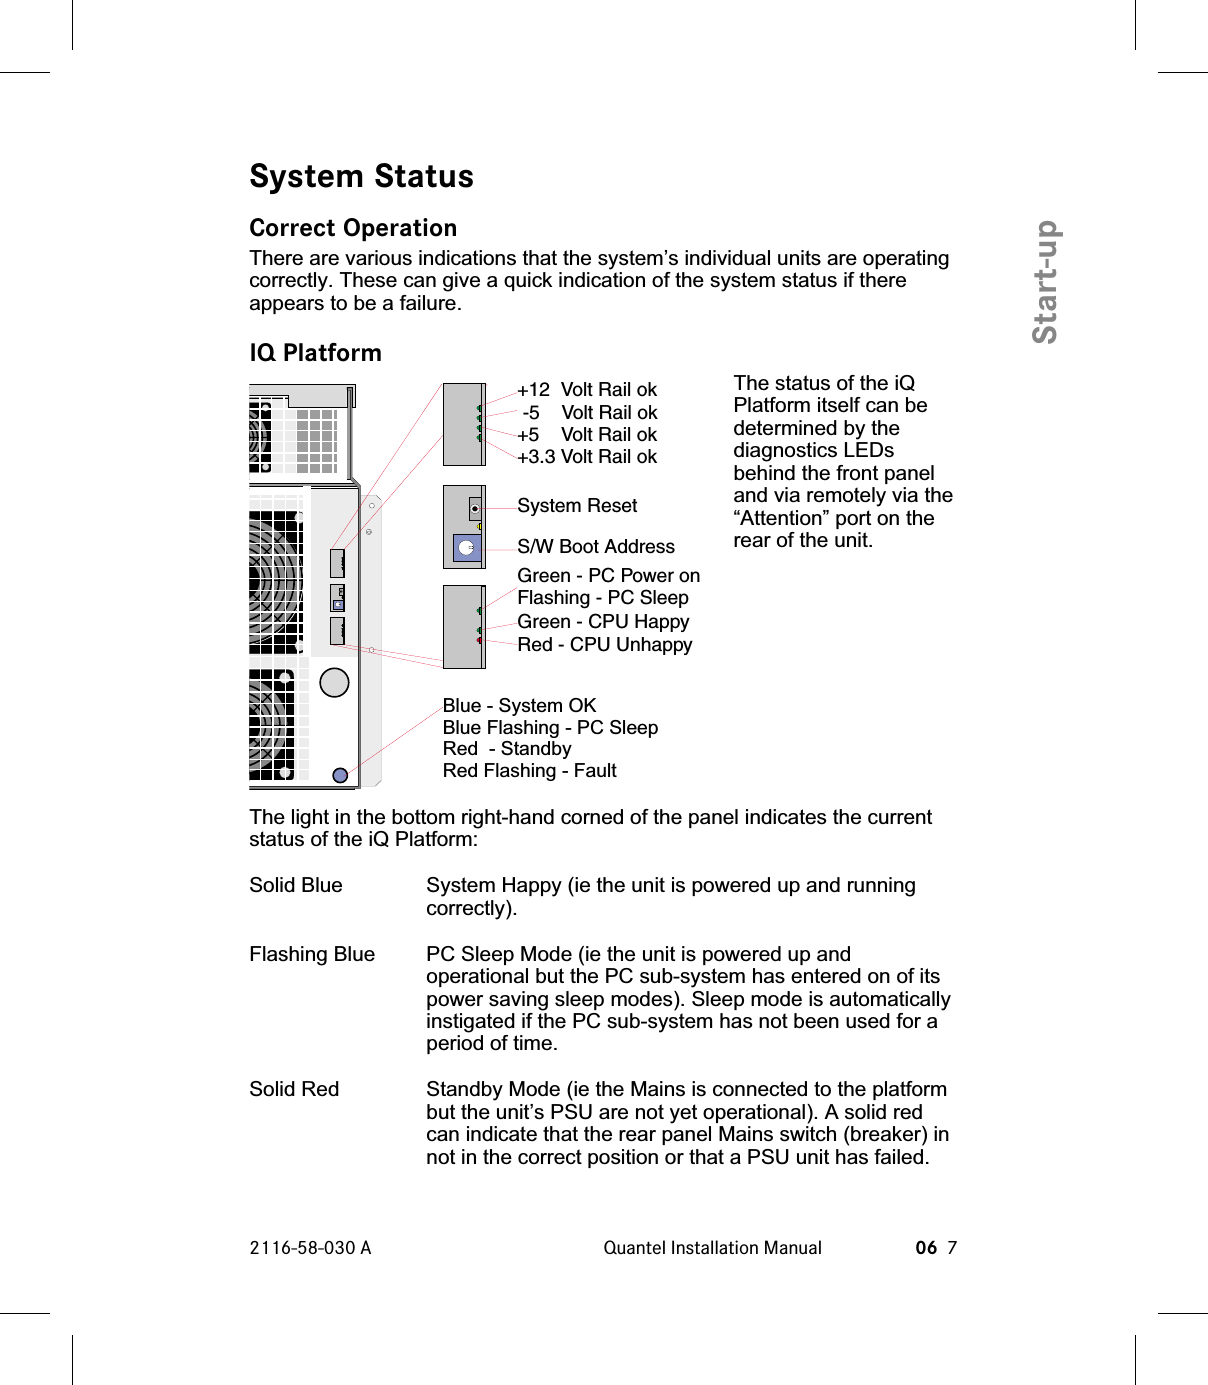 System StatusCorrect OperationThere are various indications that the system’s individual units are operatingcorrectly. These can give a quick indication of the system status if thereappears to be a failure.IQ PlatformThe status of the iQPlatform itself can bedetermined by thediagnostics LEDsbehind the front paneland via remotely via the“Attention” port on therear of the unit.The light in the bottom right-hand corned of the panel indicates the currentstatus of the iQ Platform:Solid Blue System Happy (ie the unit is powered up and runningcorrectly).Flashing Blue PC Sleep Mode (ie the unit is powered up andoperational but the PC sub-system has entered on of itspower saving sleep modes). Sleep mode is automaticallyinstigated if the PC sub-system has not been used for aperiod of time.Solid Red Standby Mode (ie the Mains is connected to the platformbut the unit’s PSU are not yet operational). A solid redcan indicate that the rear panel Mains switch (breaker) innot in the correct position or that a PSU unit has failed.2116-58-030 A Quantel Installation Manual 06 7Start-upBlue - System OKBlue Flashing - PC SleepRed - StandbyRed Flashing - FaultSystem ResetS/W Boot Address+12 Volt Rail ok-5 Volt Rail ok+5 Volt Rail ok+3.3 Volt Rail okGreen-PC PoweronFlashing - PC SleepGreen - CPU HappyRed - CPU Unhappy